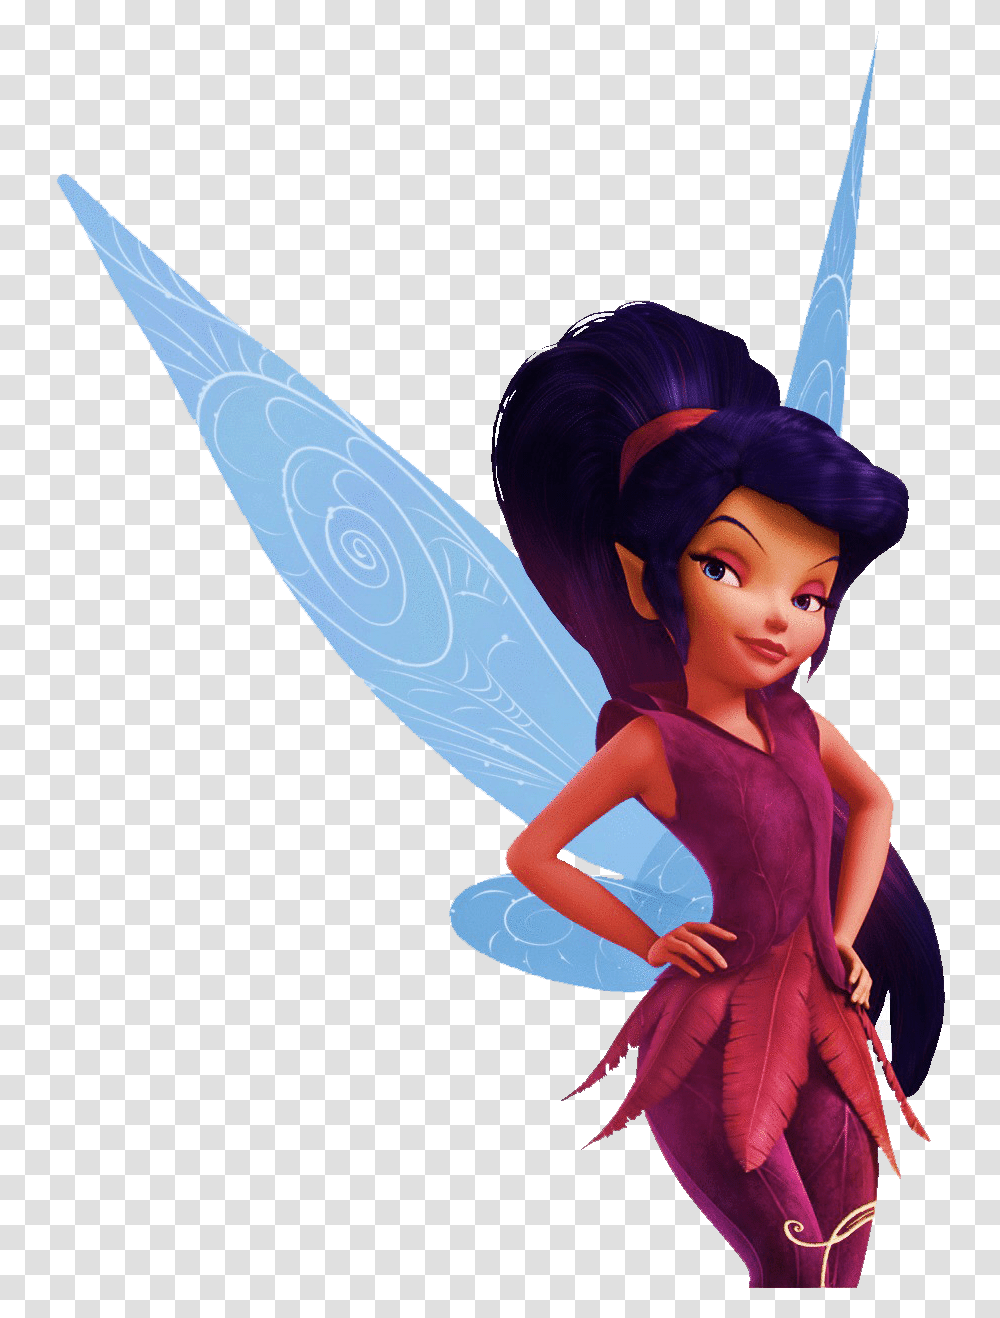 Tinkerbell Vidia Free Image Great Fairy Rescue Vidia, Person, Human, Dance Pose Transparent Png